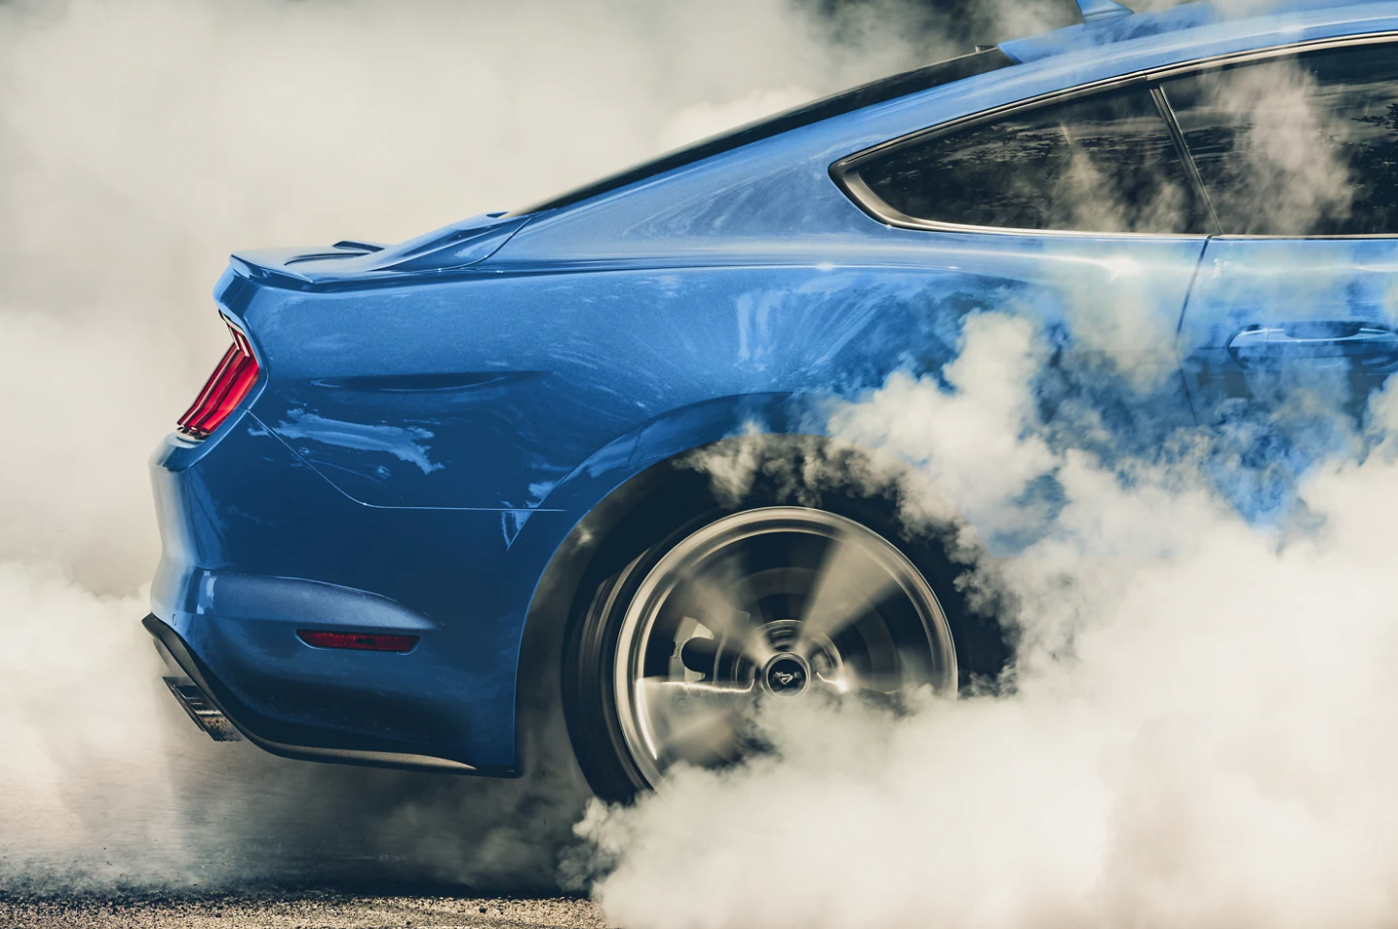 A Ford Mustang creates smoke as the back wheels spin before going into gear